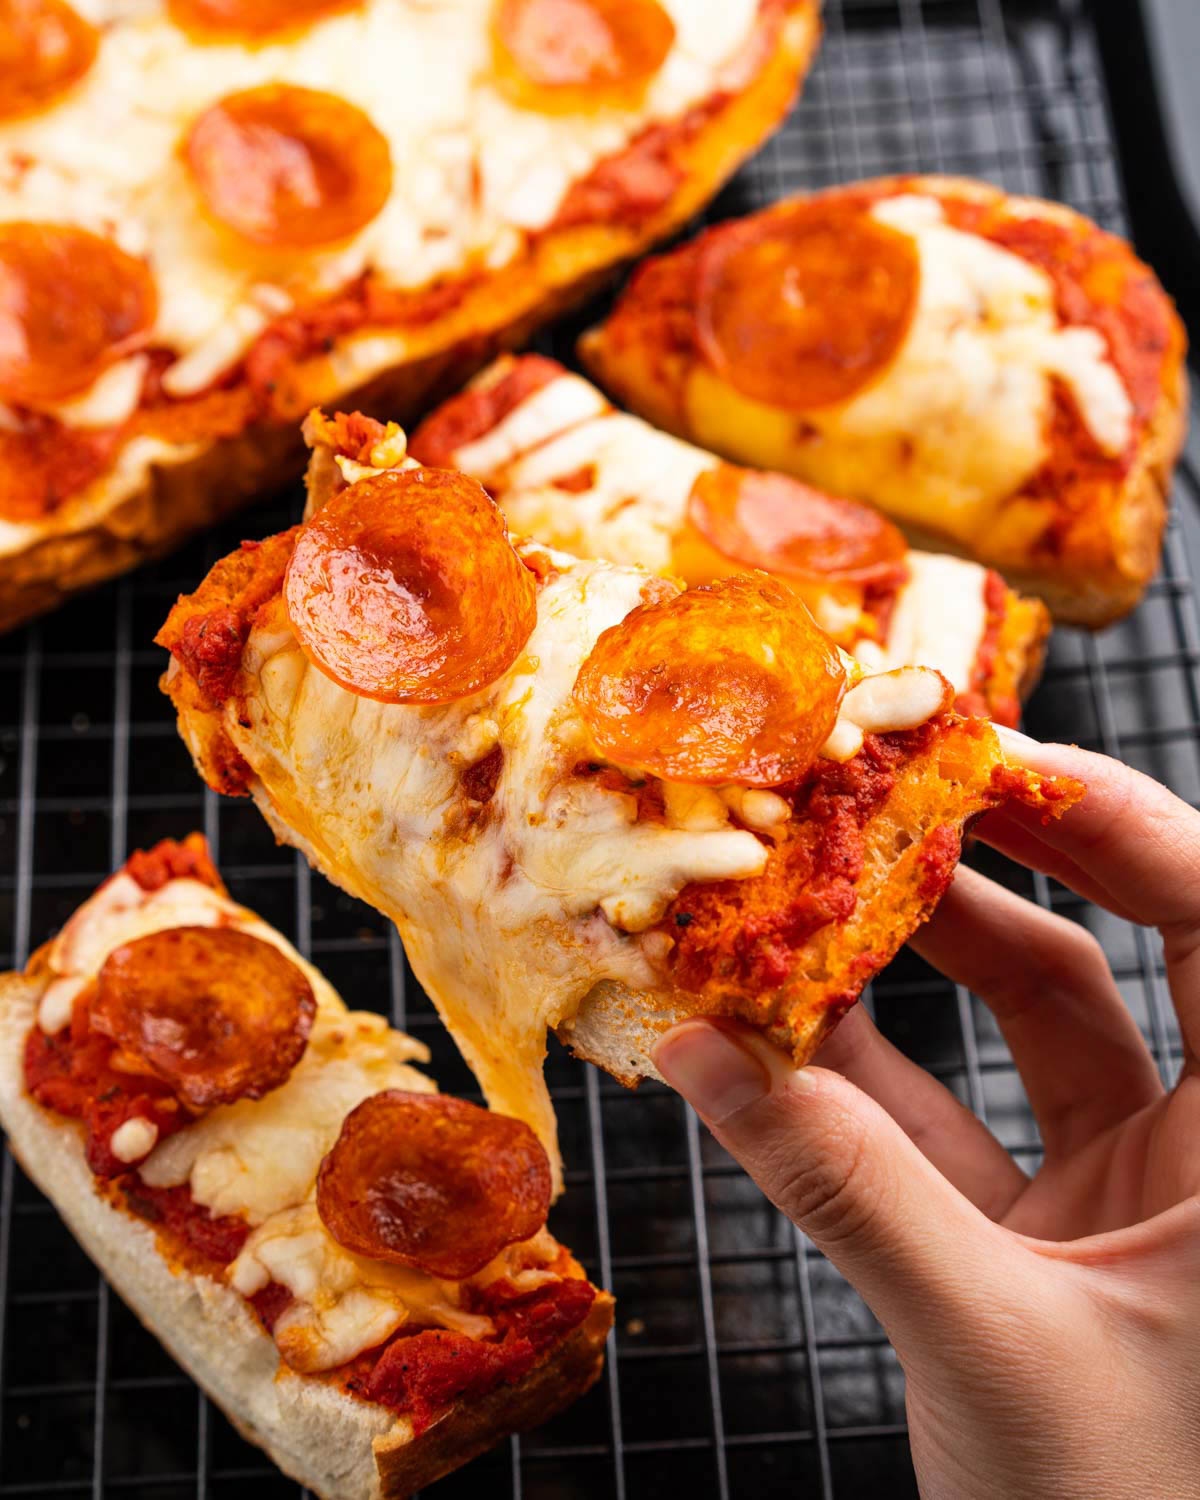 Cooked french bread pizza is sliced and a hand is displaying a slice closer to the camera. 